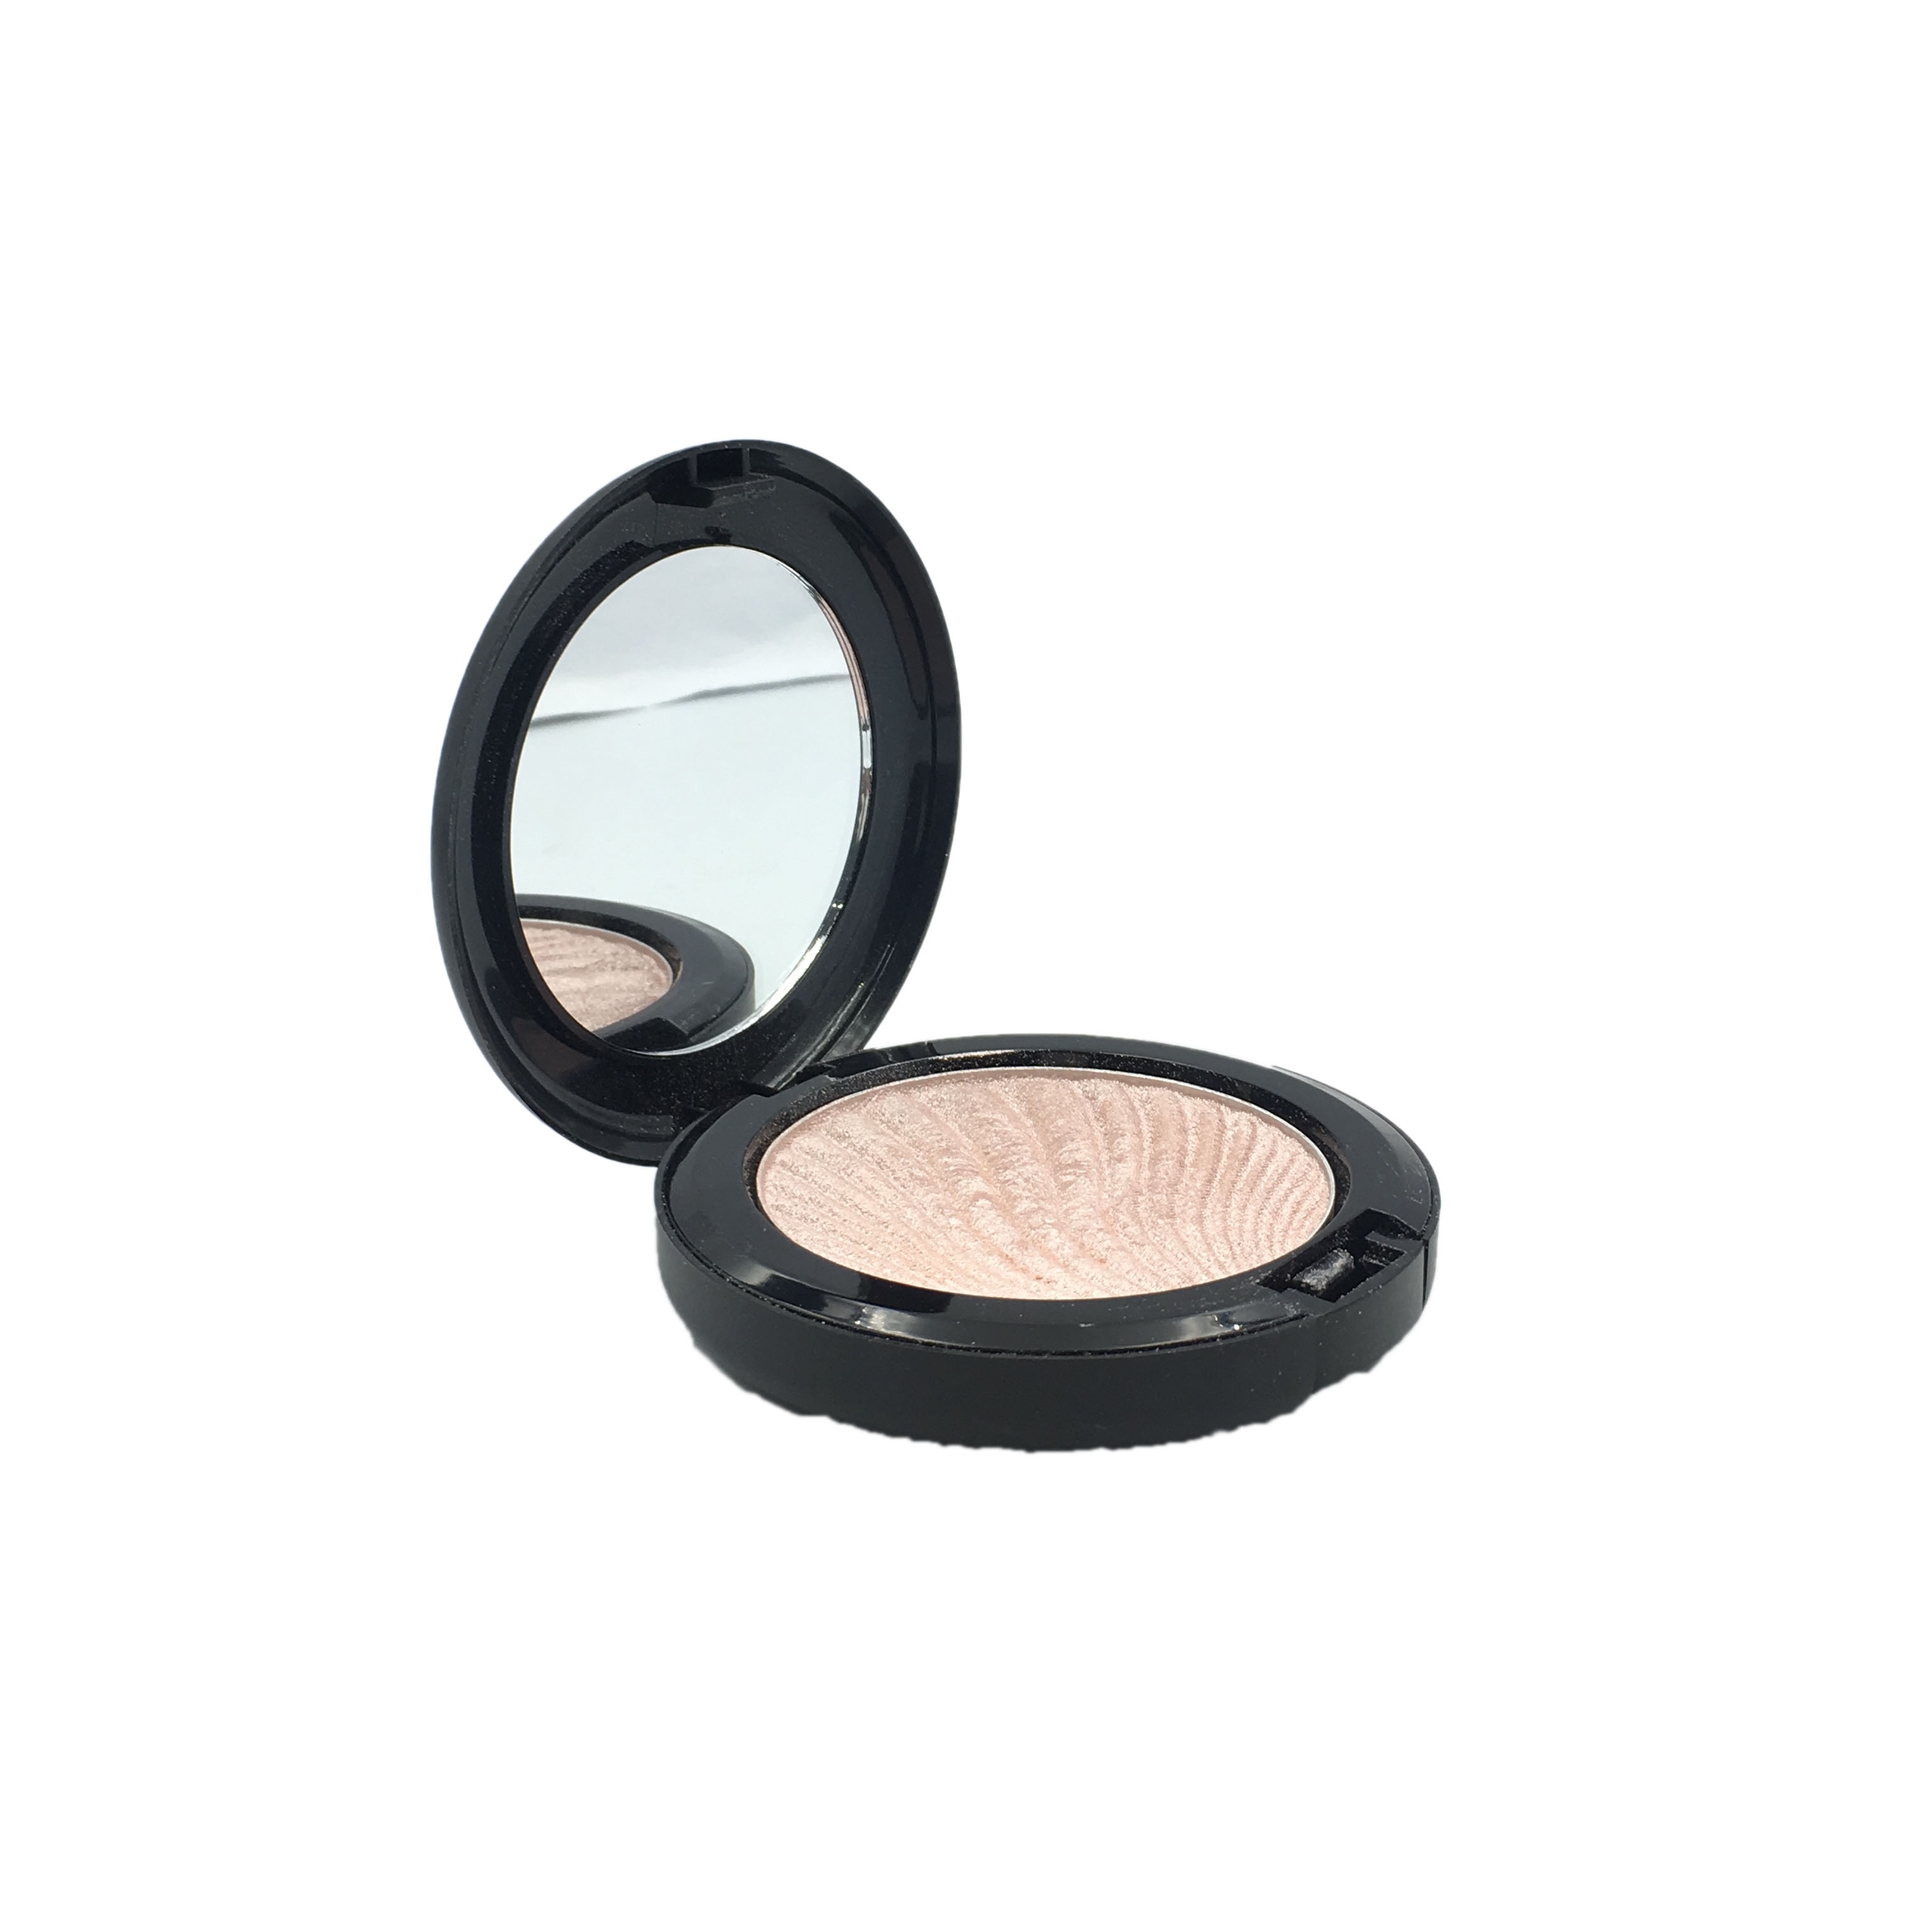 Focallure Blossom Ultra Glow Beam Baked Powder Highlighter Faces